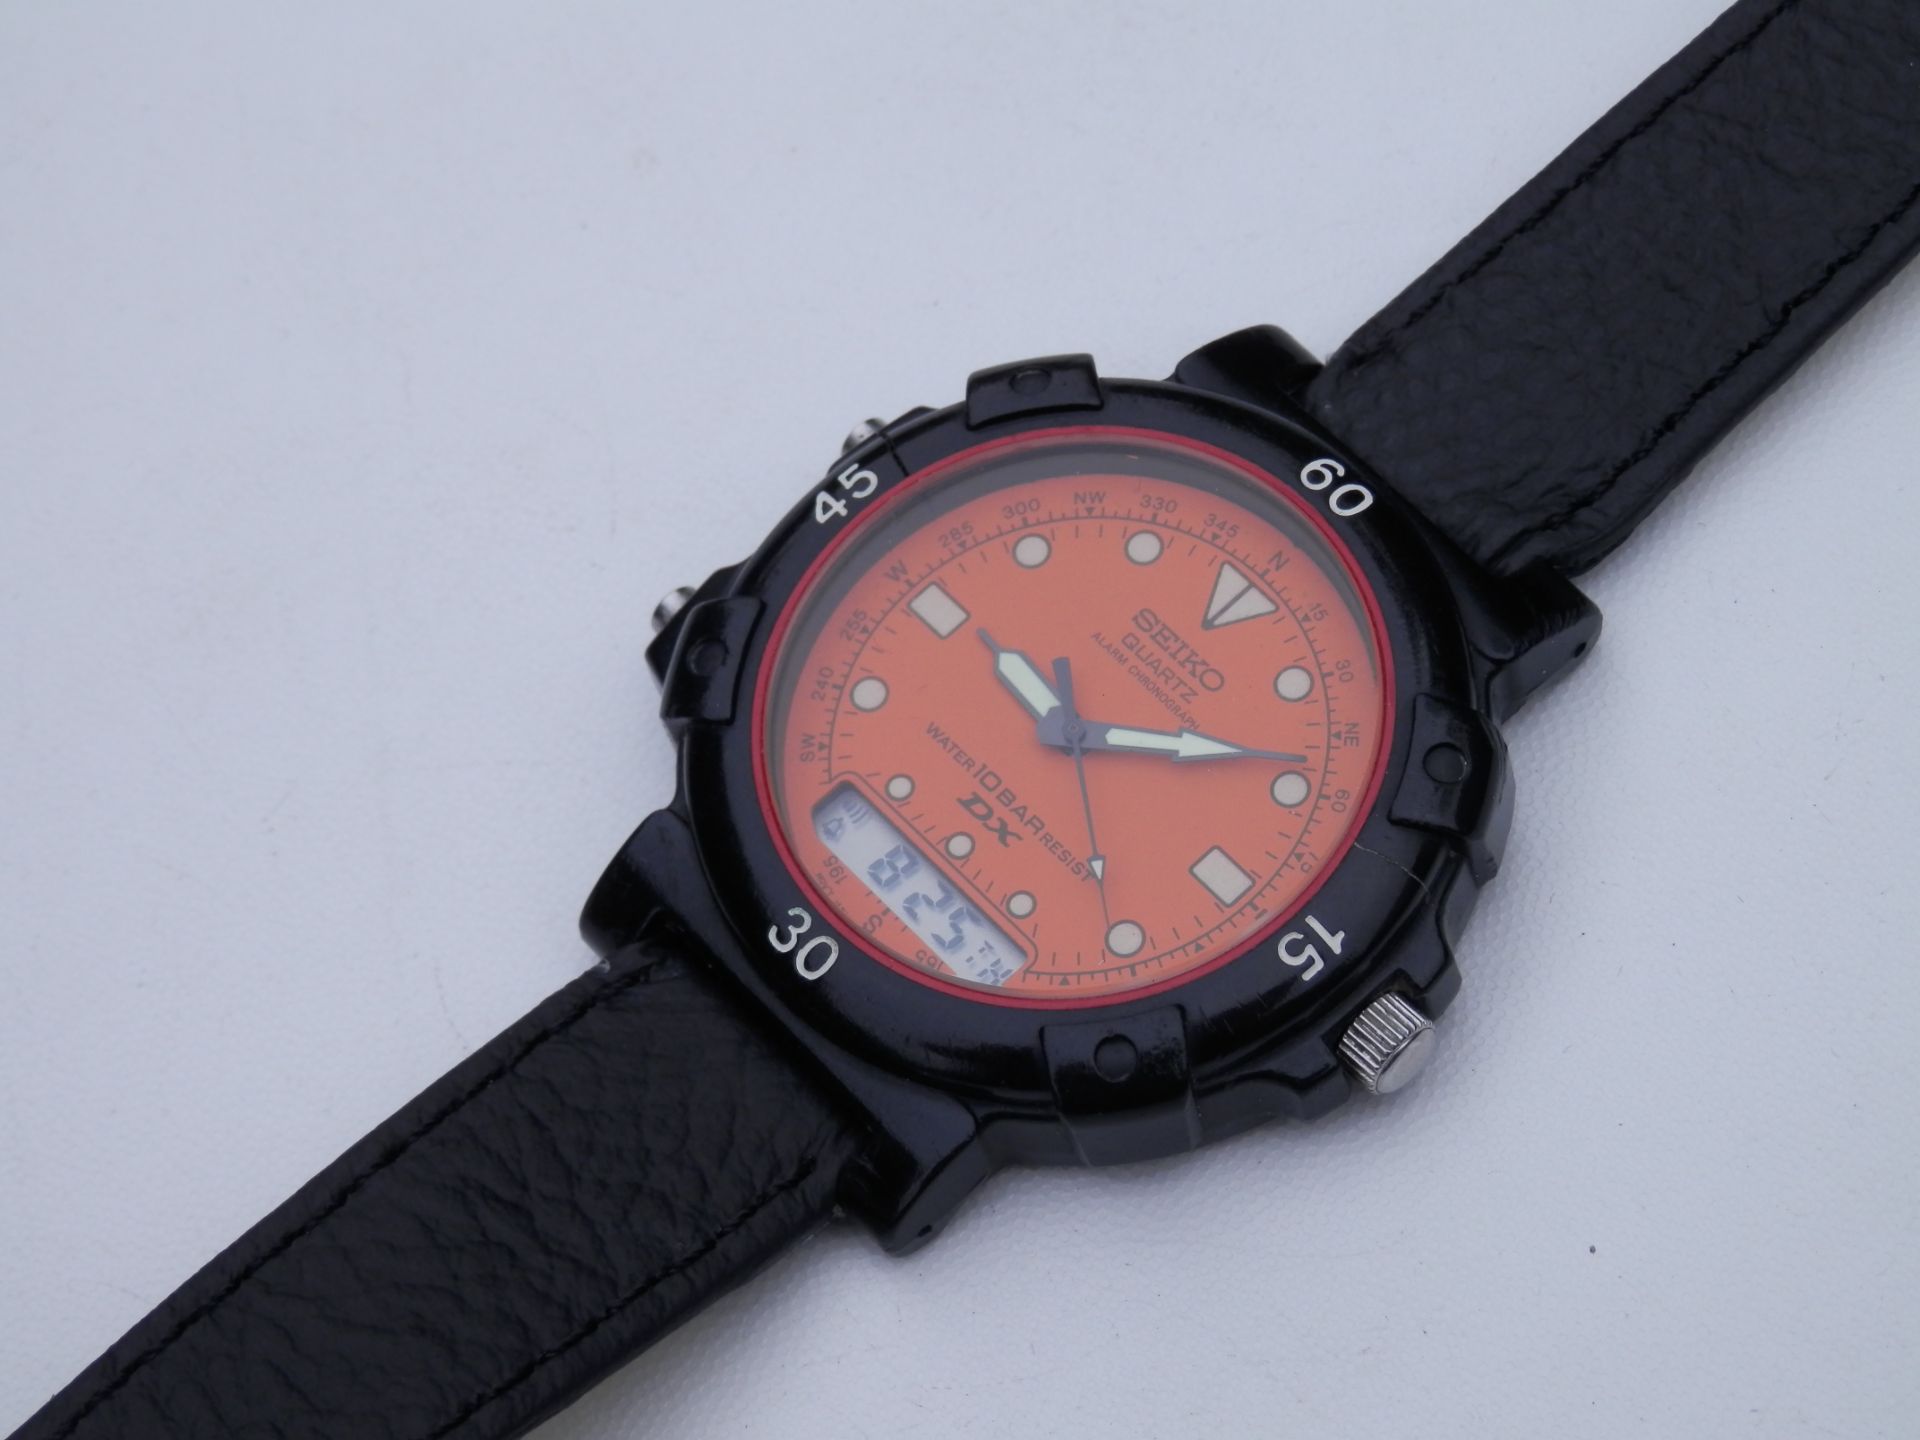 RARE WORKING GENTS 1990 SEIKO DX V041 ALARM CHRONOGRAPH, DIGITAL & ANALOGUE WATCH. VALUED AT £120+ - Image 3 of 8